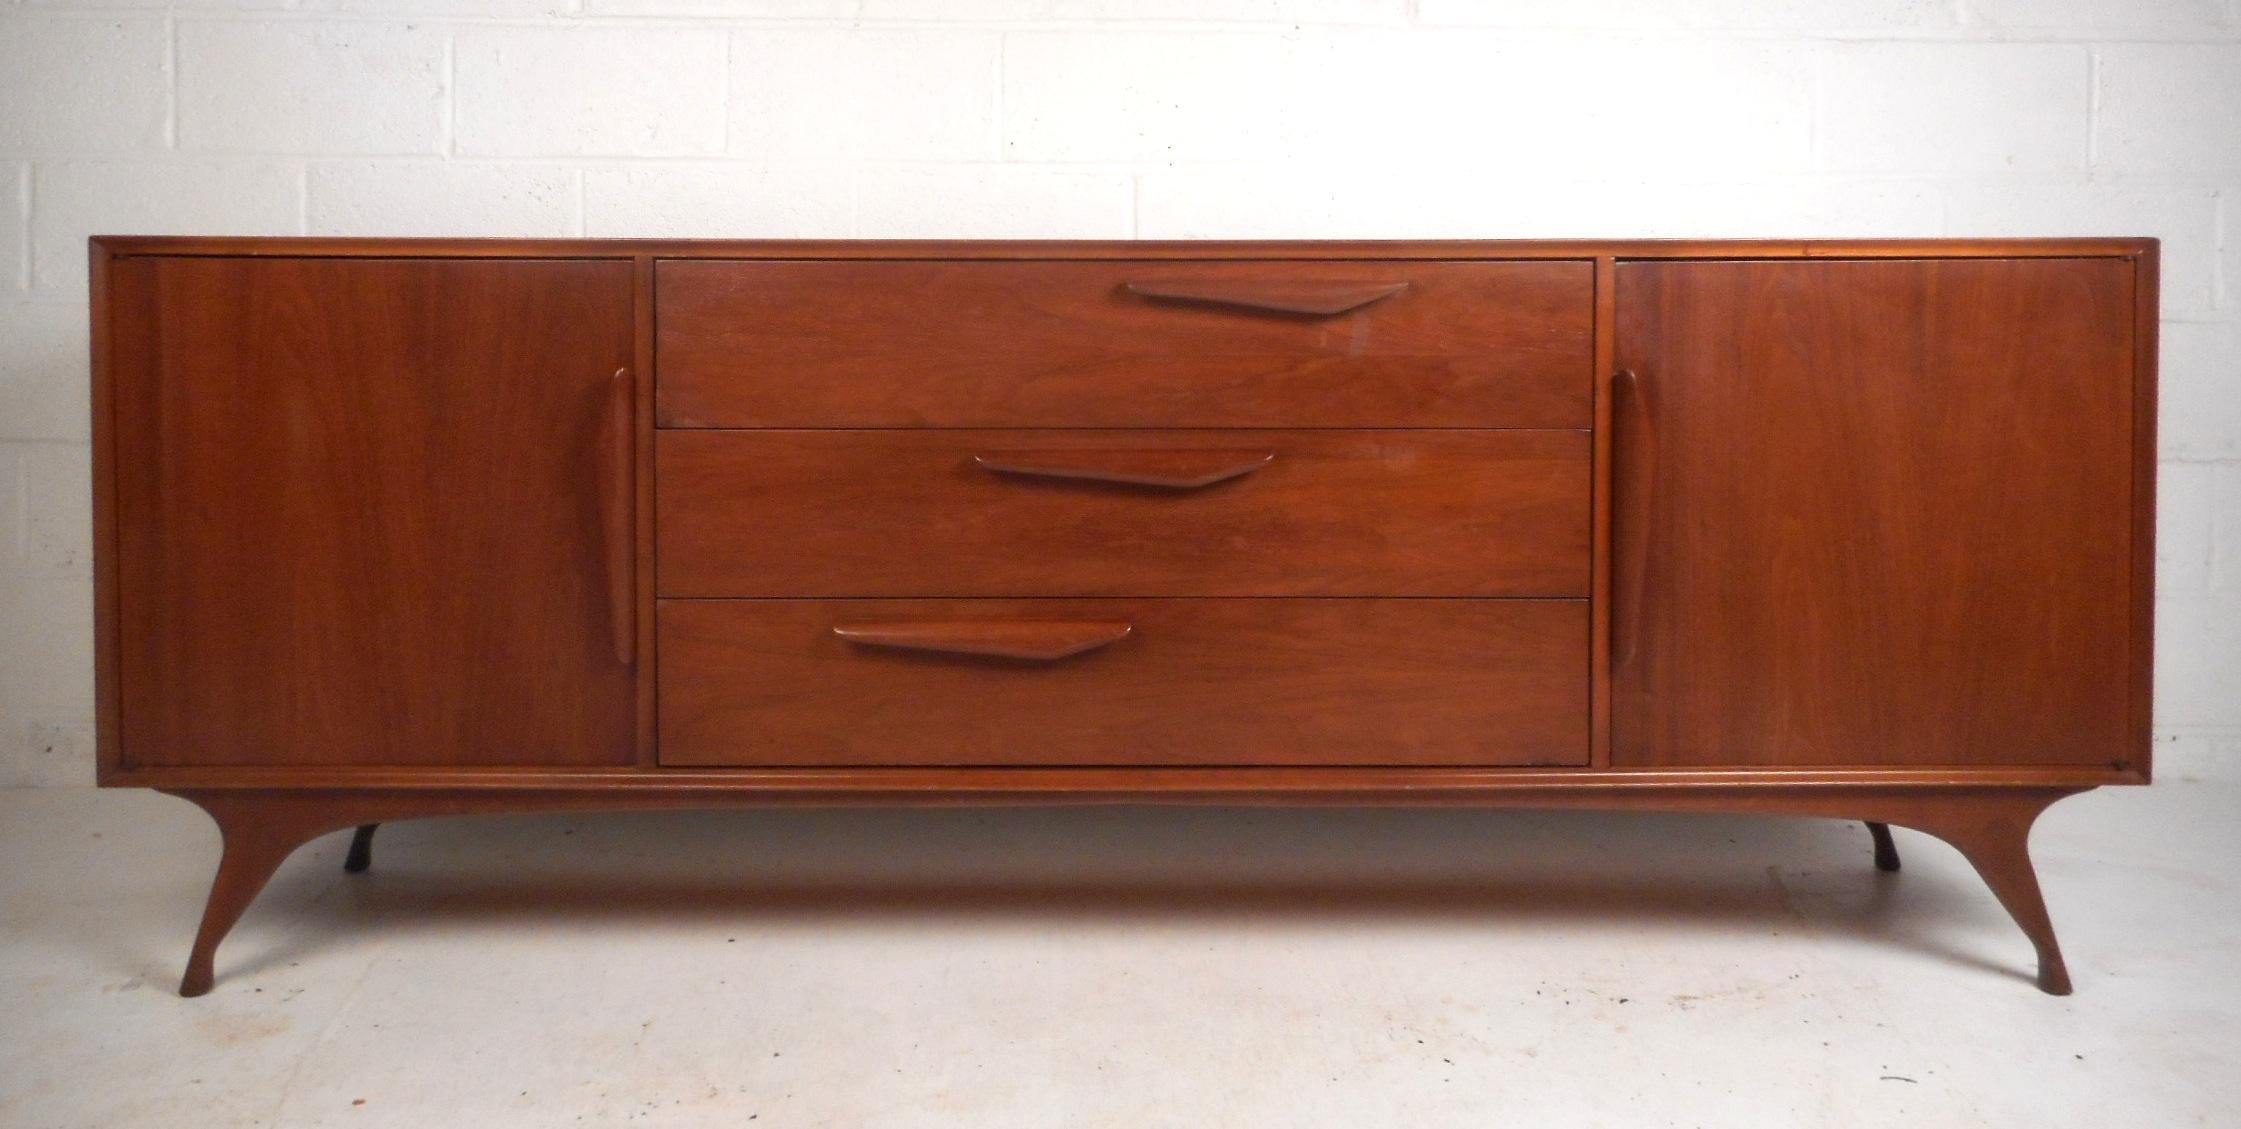 This beautiful vintage modern credenza features nine large drawers with six of them hidden by cabinet doors. This unique case piece has sculpted horizontal pulls on the centre drawers that graduate downward on an angle. Gorgeous walnut wood grain,